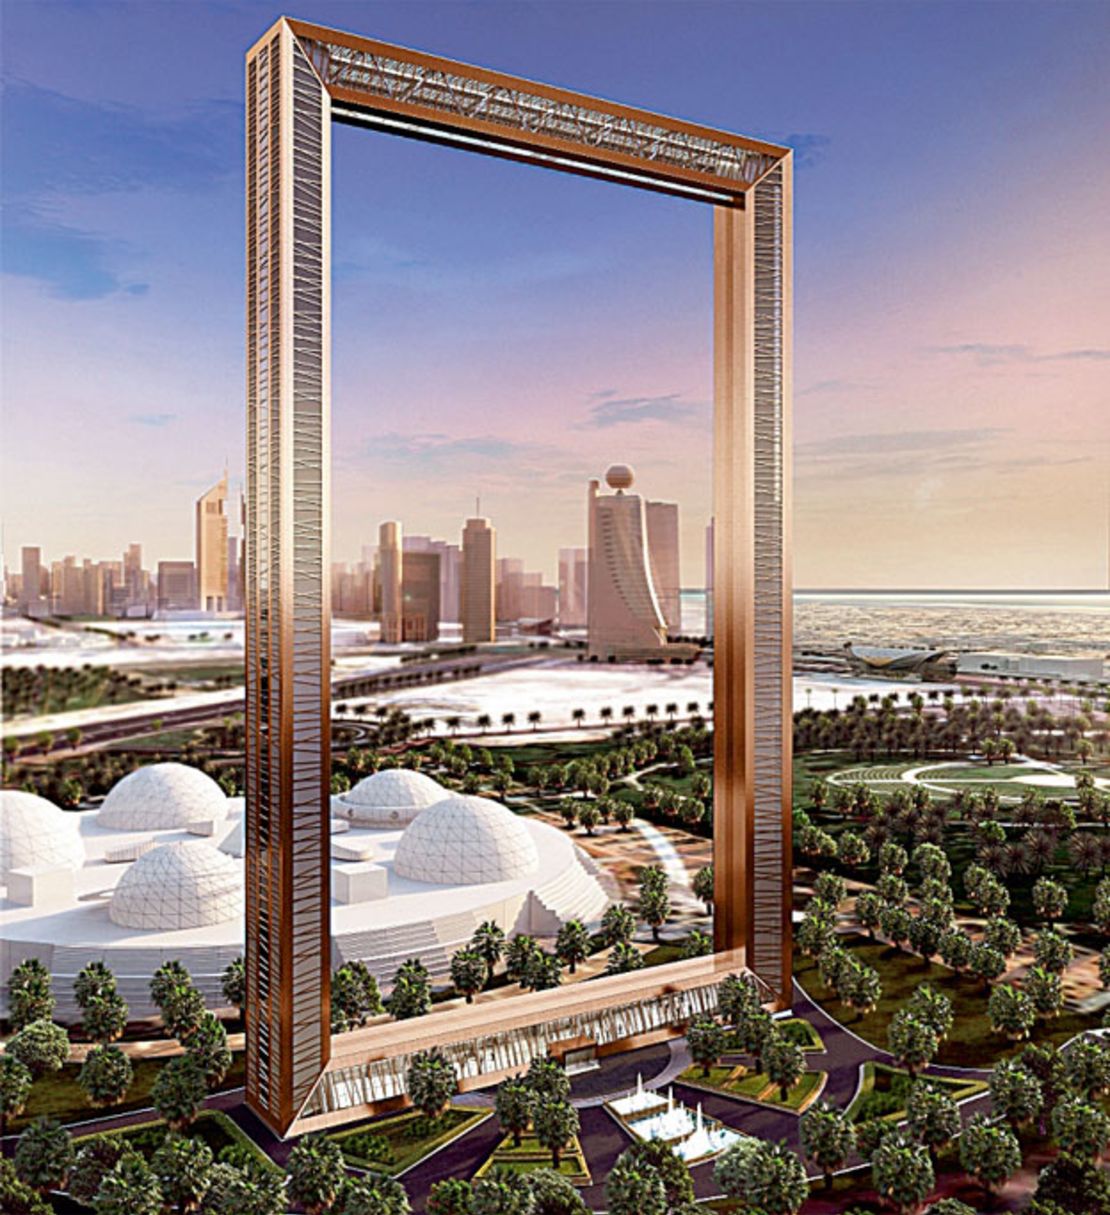 A digitalized image of what the Dubai Frame will look like once construction is completed.